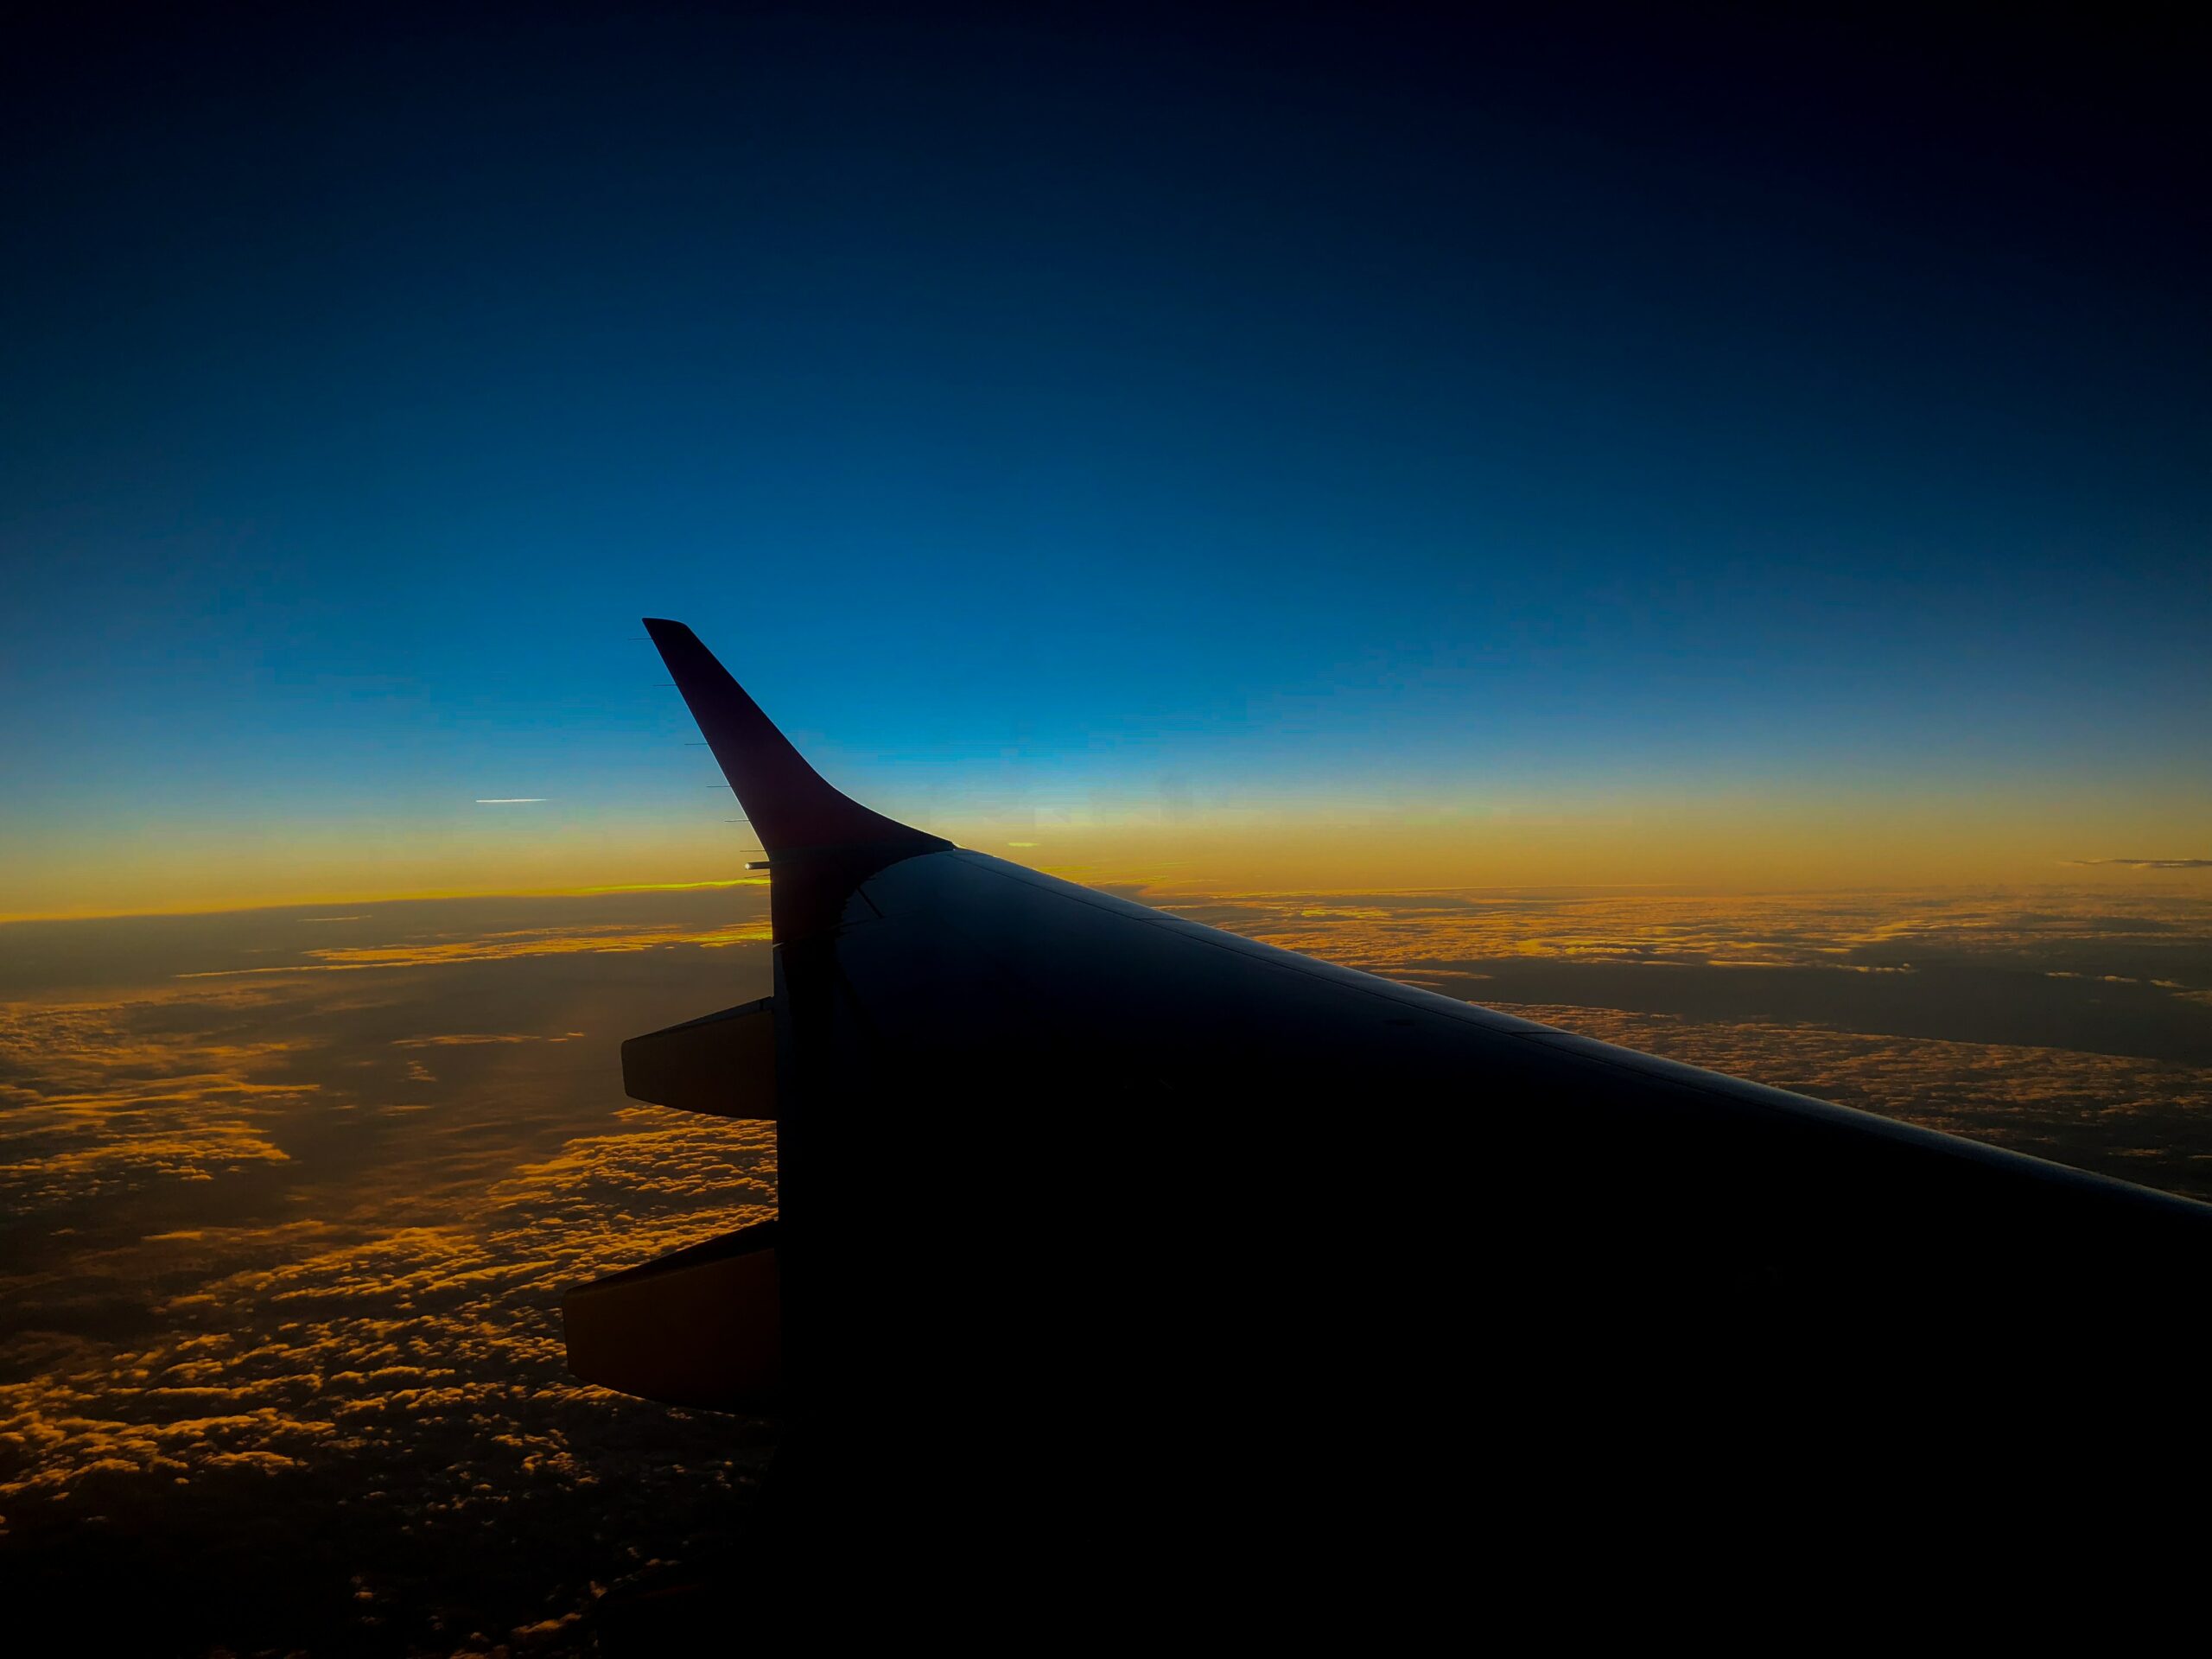 Silhouette of an aircraft wing at dusk